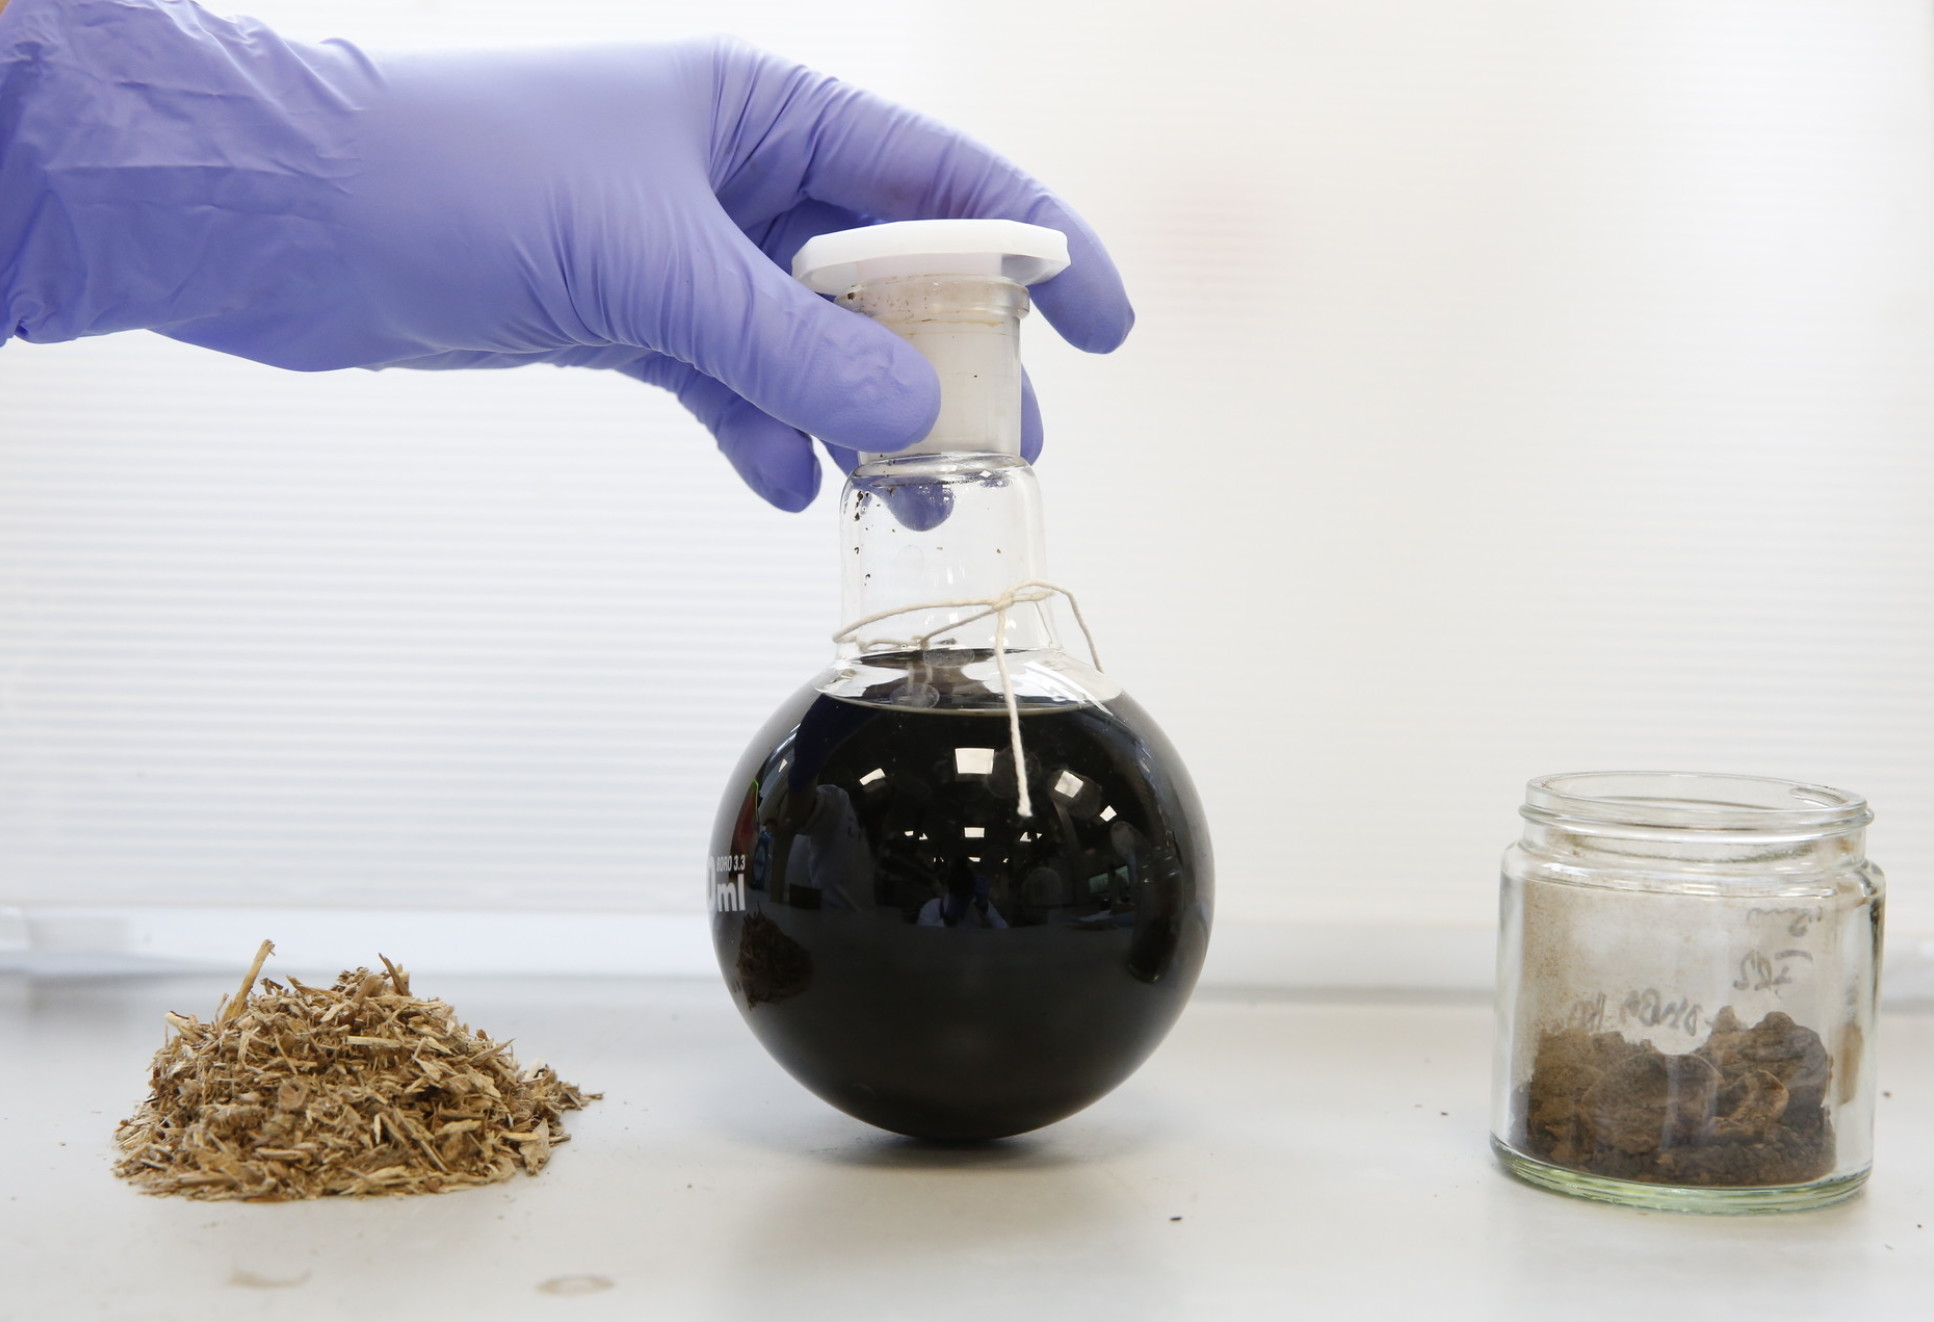 Lixea's low-cost and environmentally friendly solvent - brown liquid in a glass jar